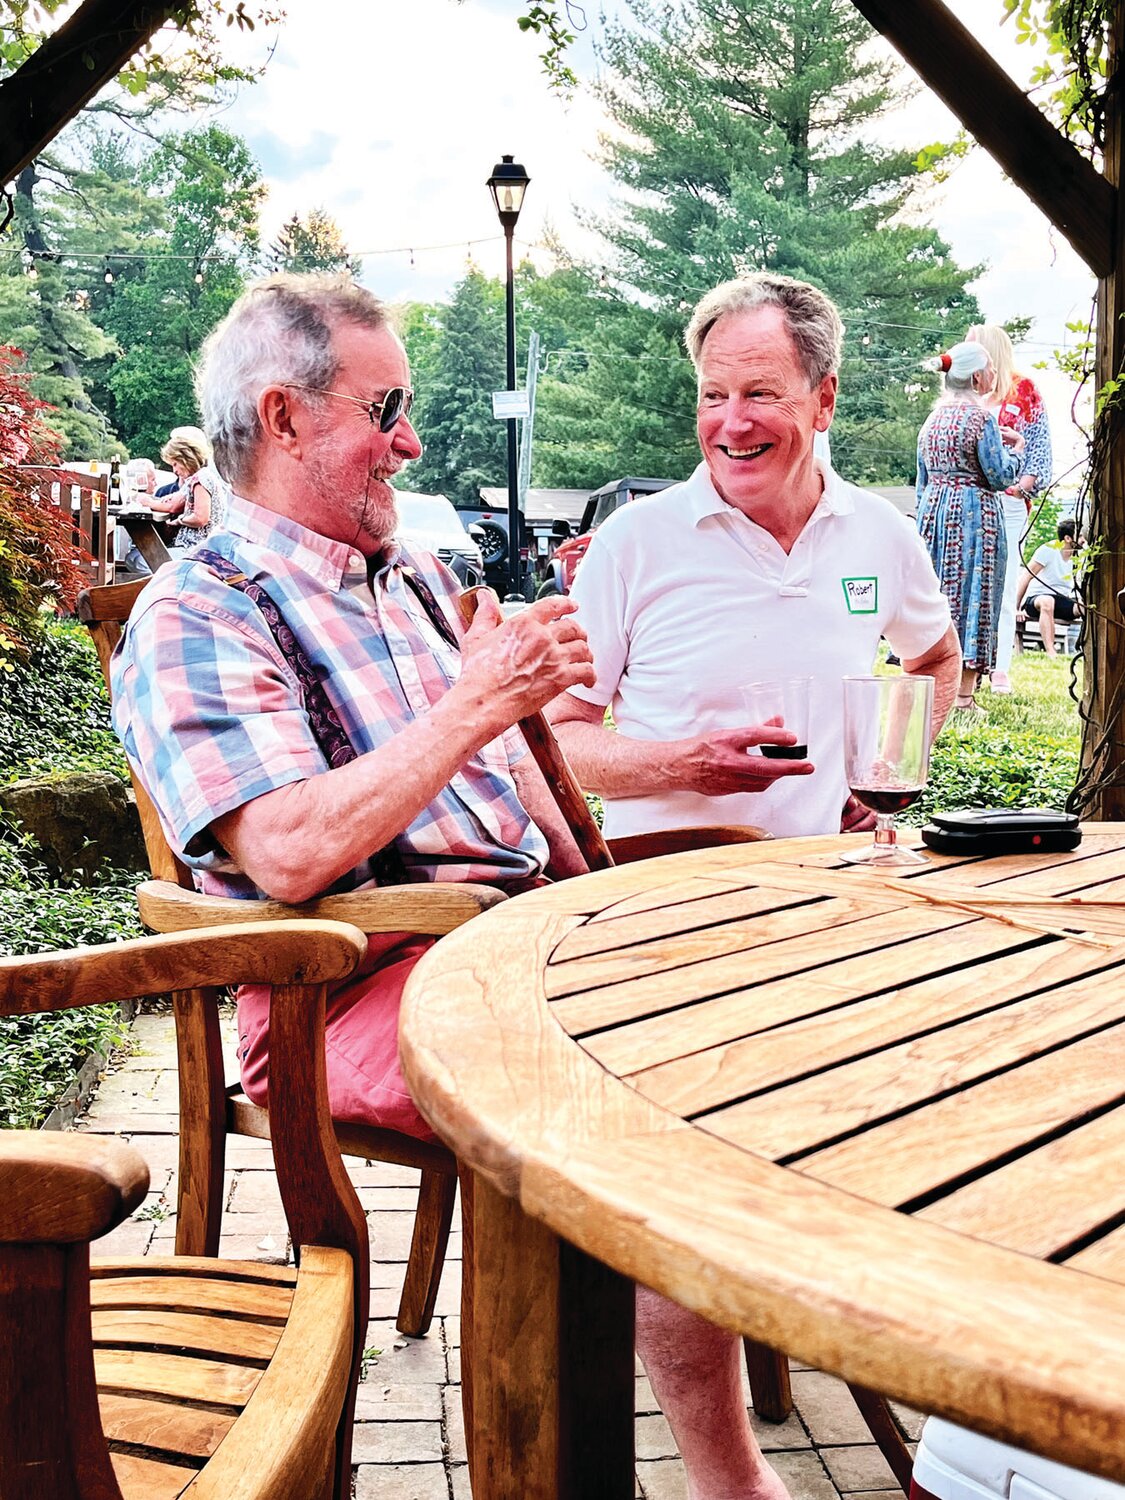 Members of the Lumberville community have a laugh at the annual Founder’s Day Picnic.